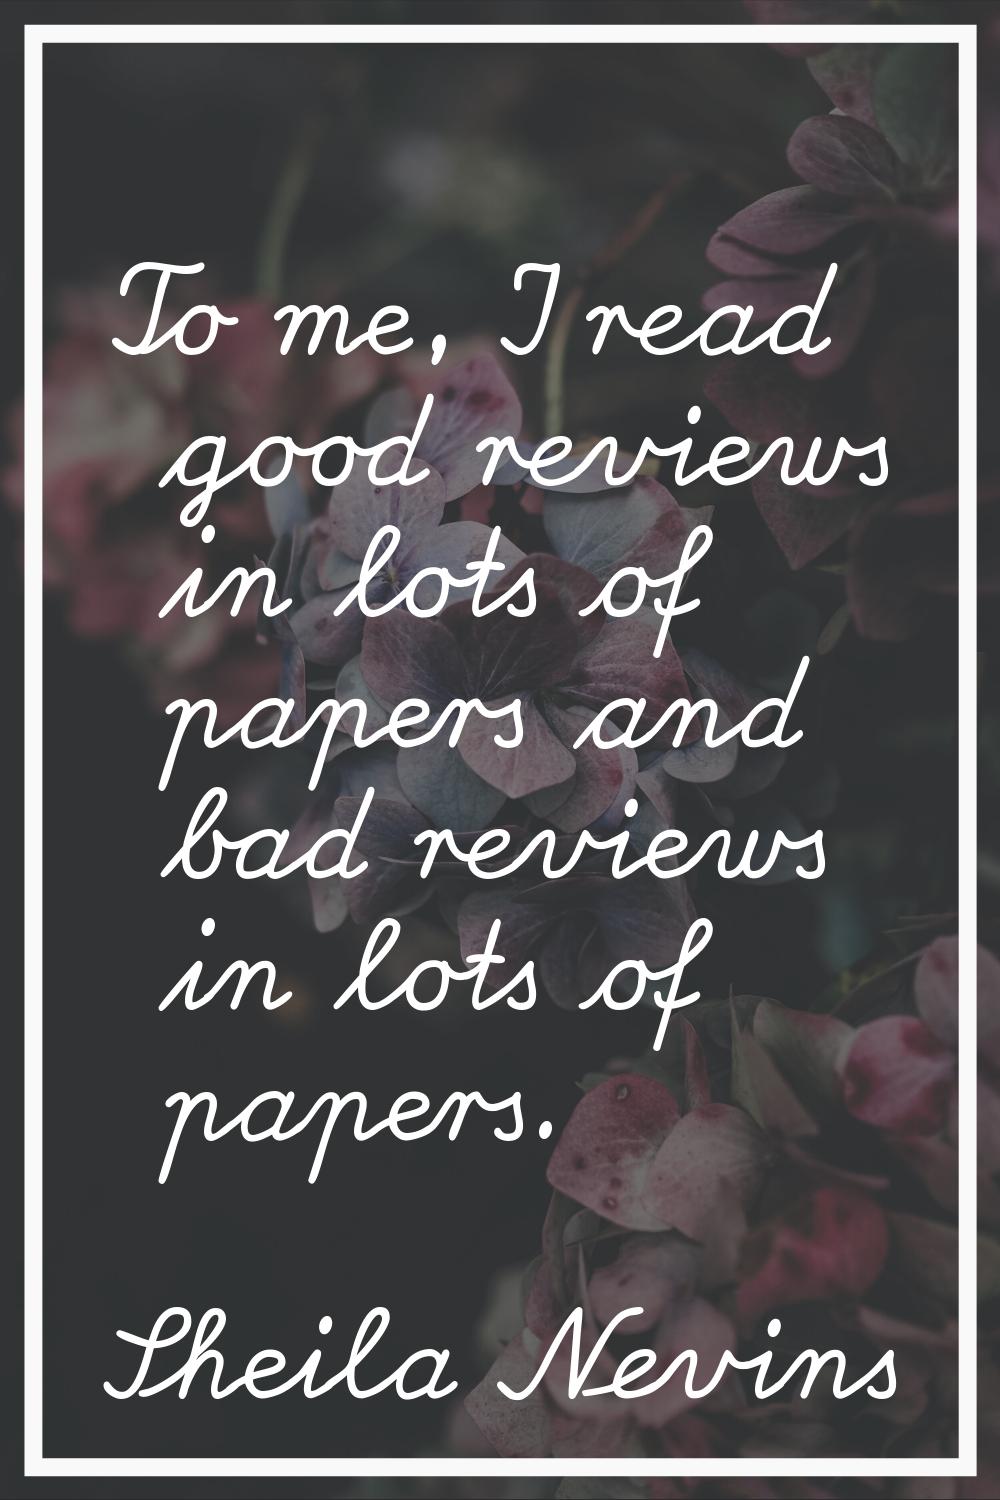 To me, I read good reviews in lots of papers and bad reviews in lots of papers.